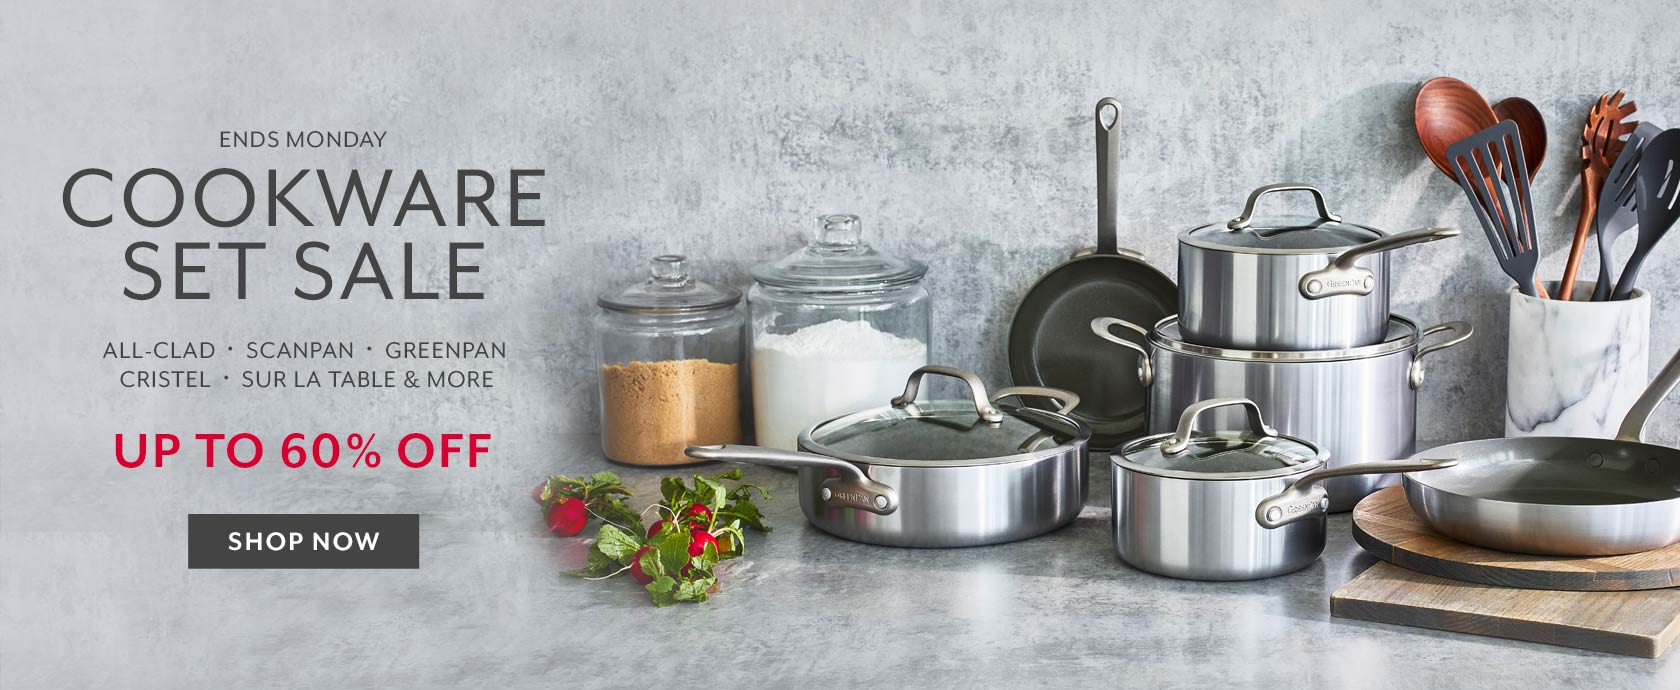 Ends Monday Cookware Set Sale up to 60% off, shop now